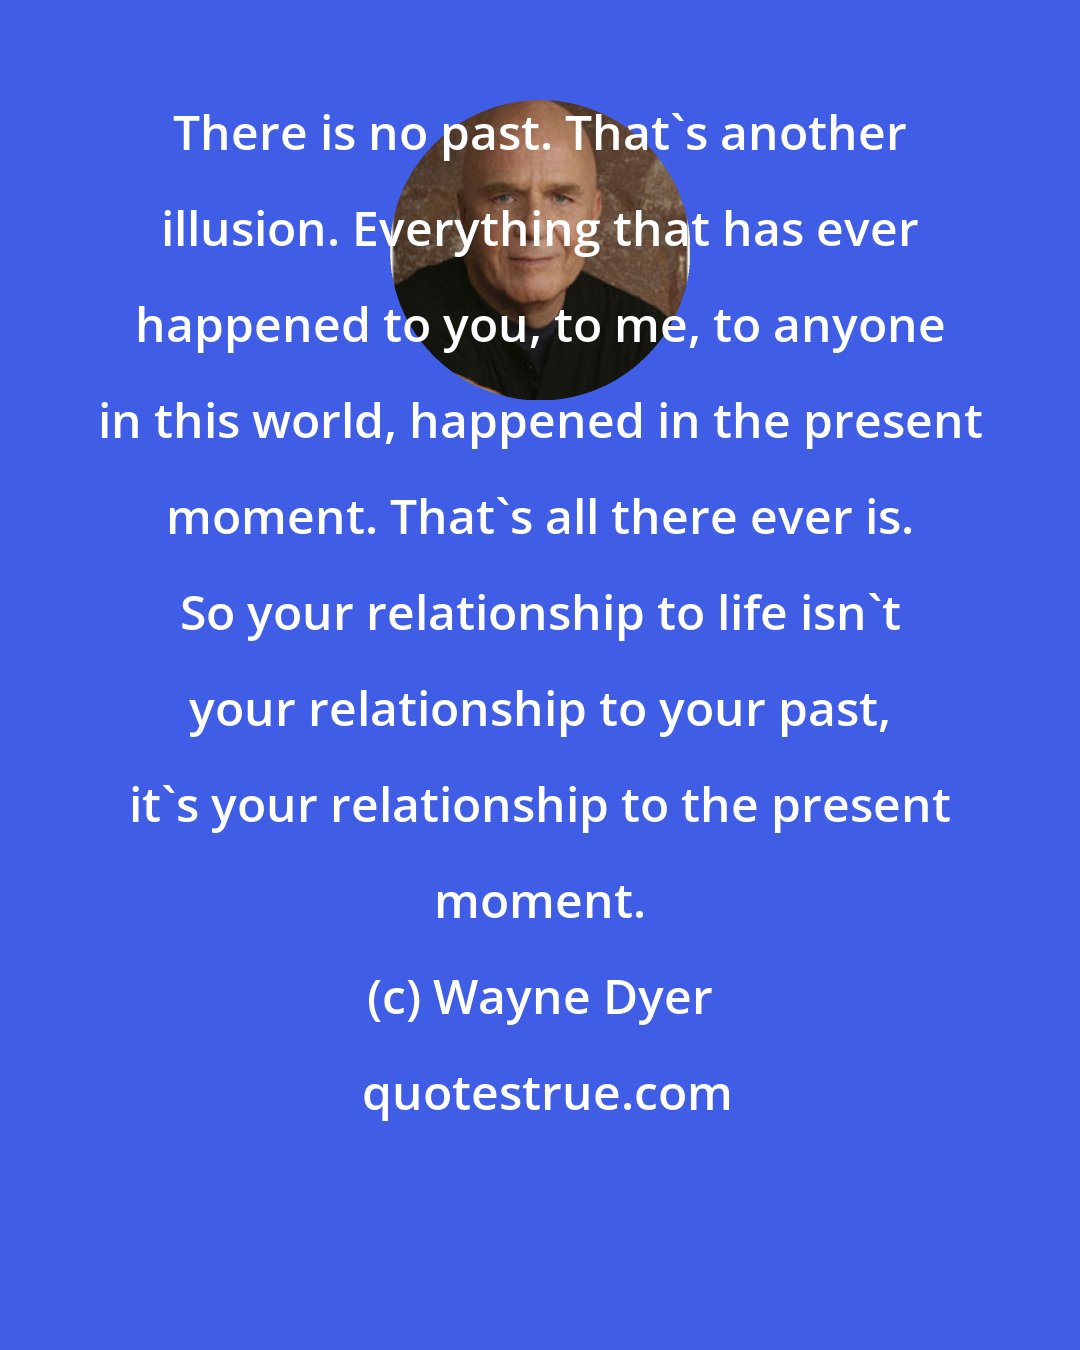 Wayne Dyer: There is no past. That's another illusion. Everything that has ever happened to you, to me, to anyone in this world, happened in the present moment. That's all there ever is. So your relationship to life isn't your relationship to your past, it's your relationship to the present moment.